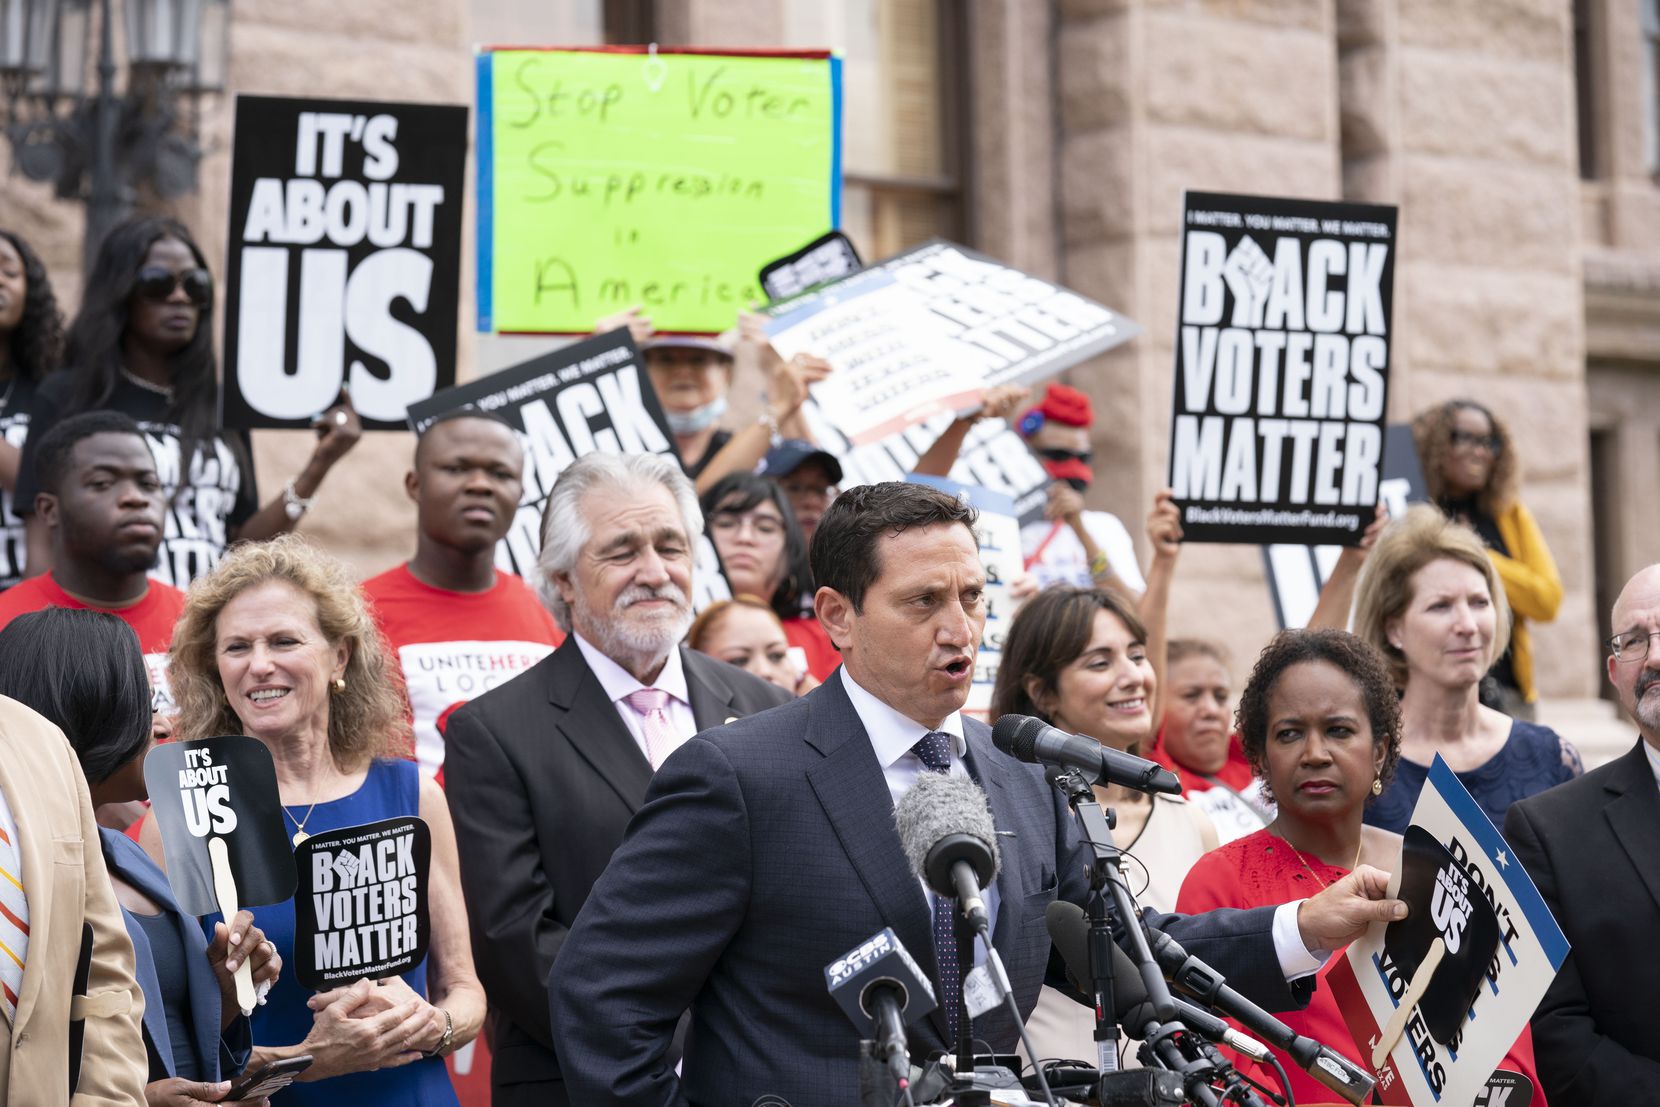 State Rep. Trey Martinez Fischer, D-San Antonio, spoke Thursday during a Capitol rally by groups including Black Voters Matter and the Texas Right to Vote Coalition. The groups decried elections bills advocated by Gov. Greg Abbott that they consider voter suppression measures. 